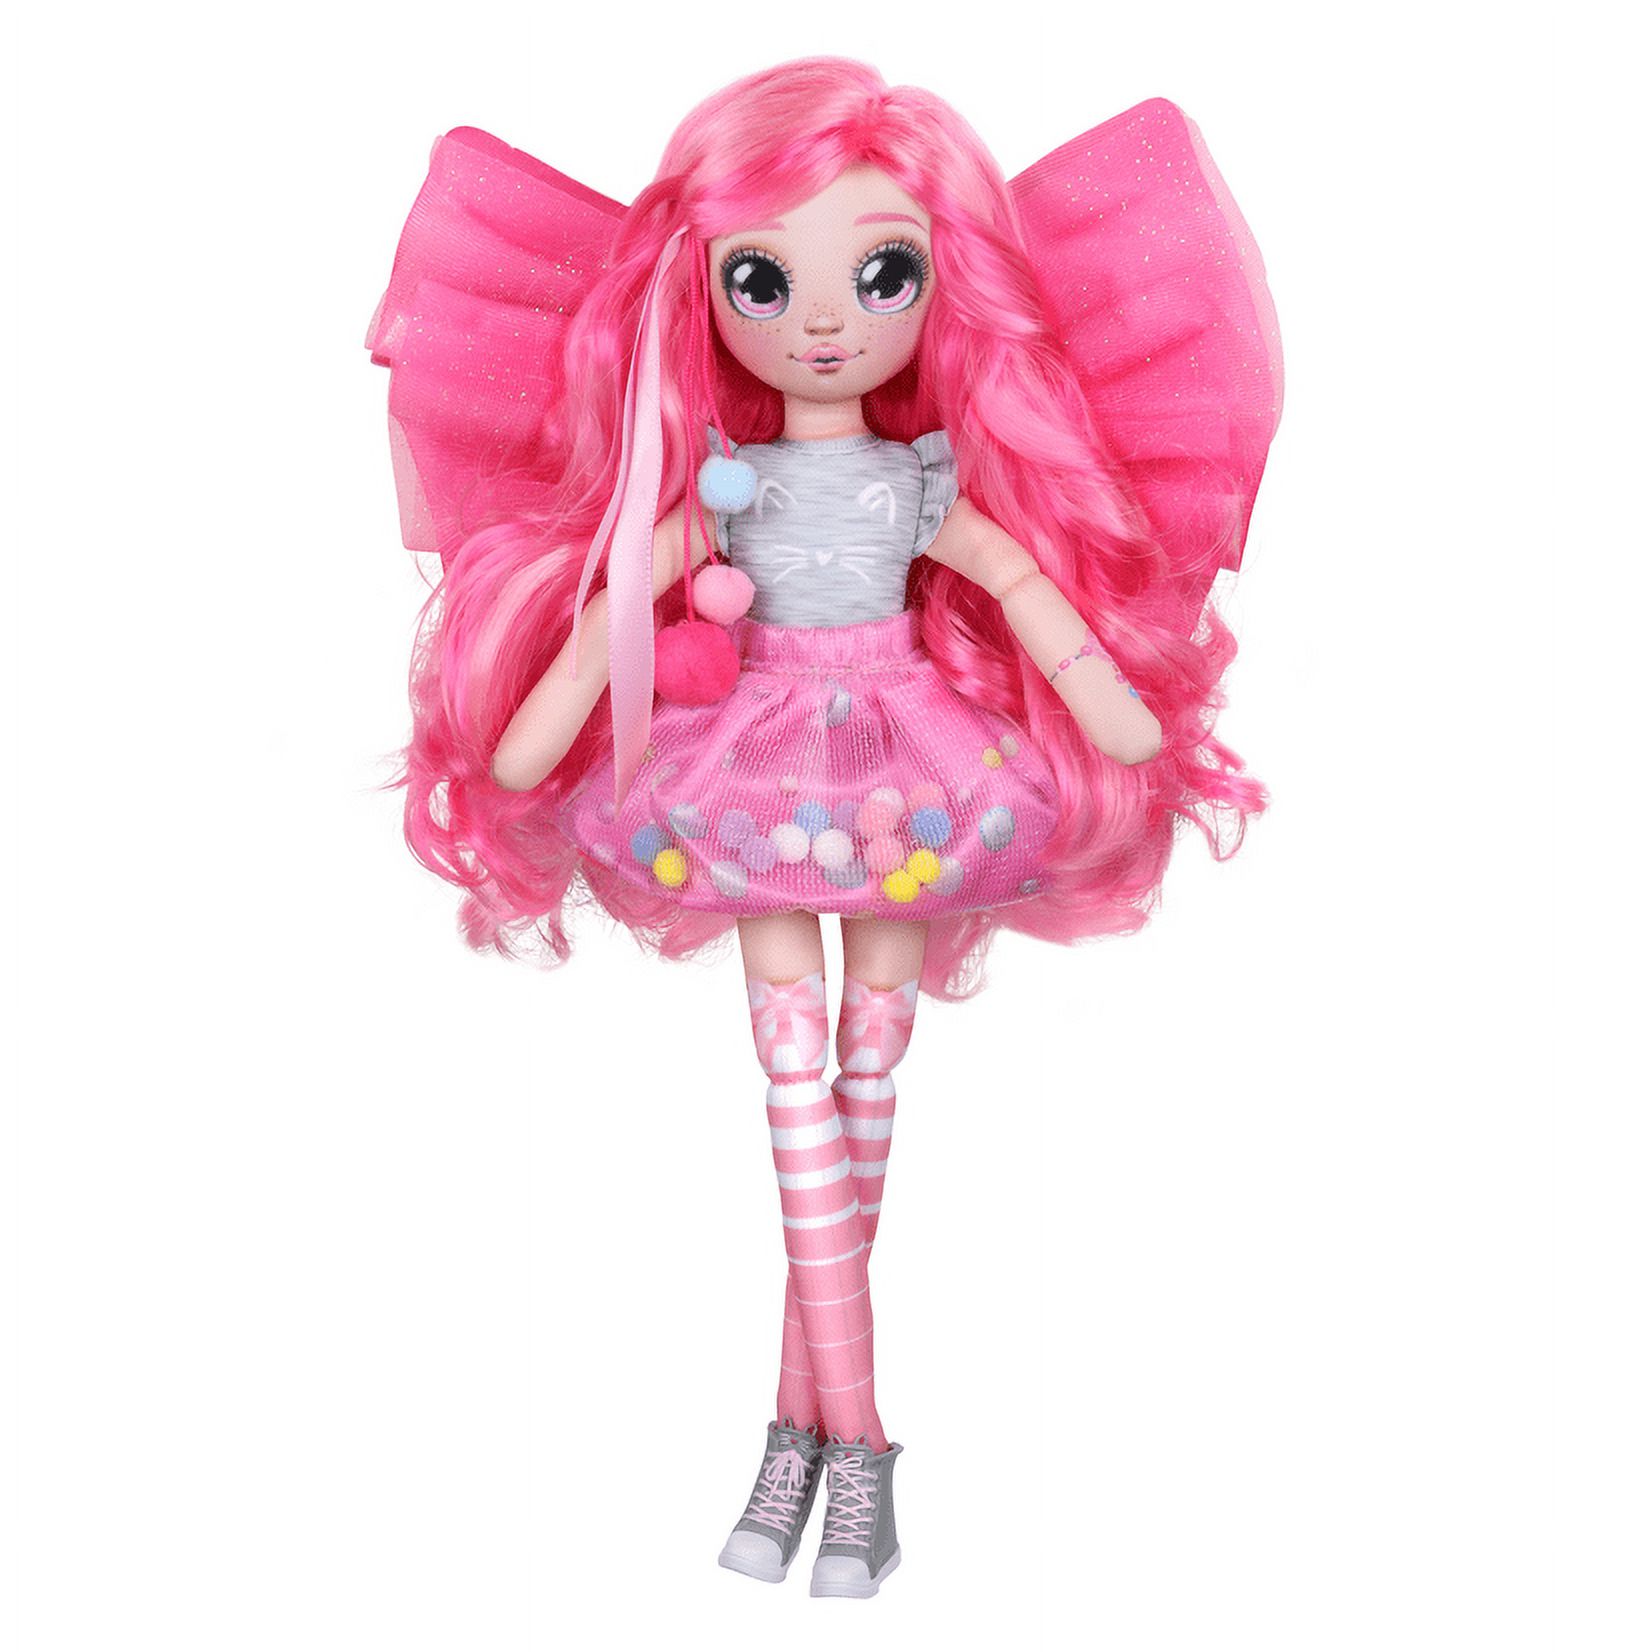 Dream Seekers Doll Single Pack – 1Pc Toy - image 1 of 8